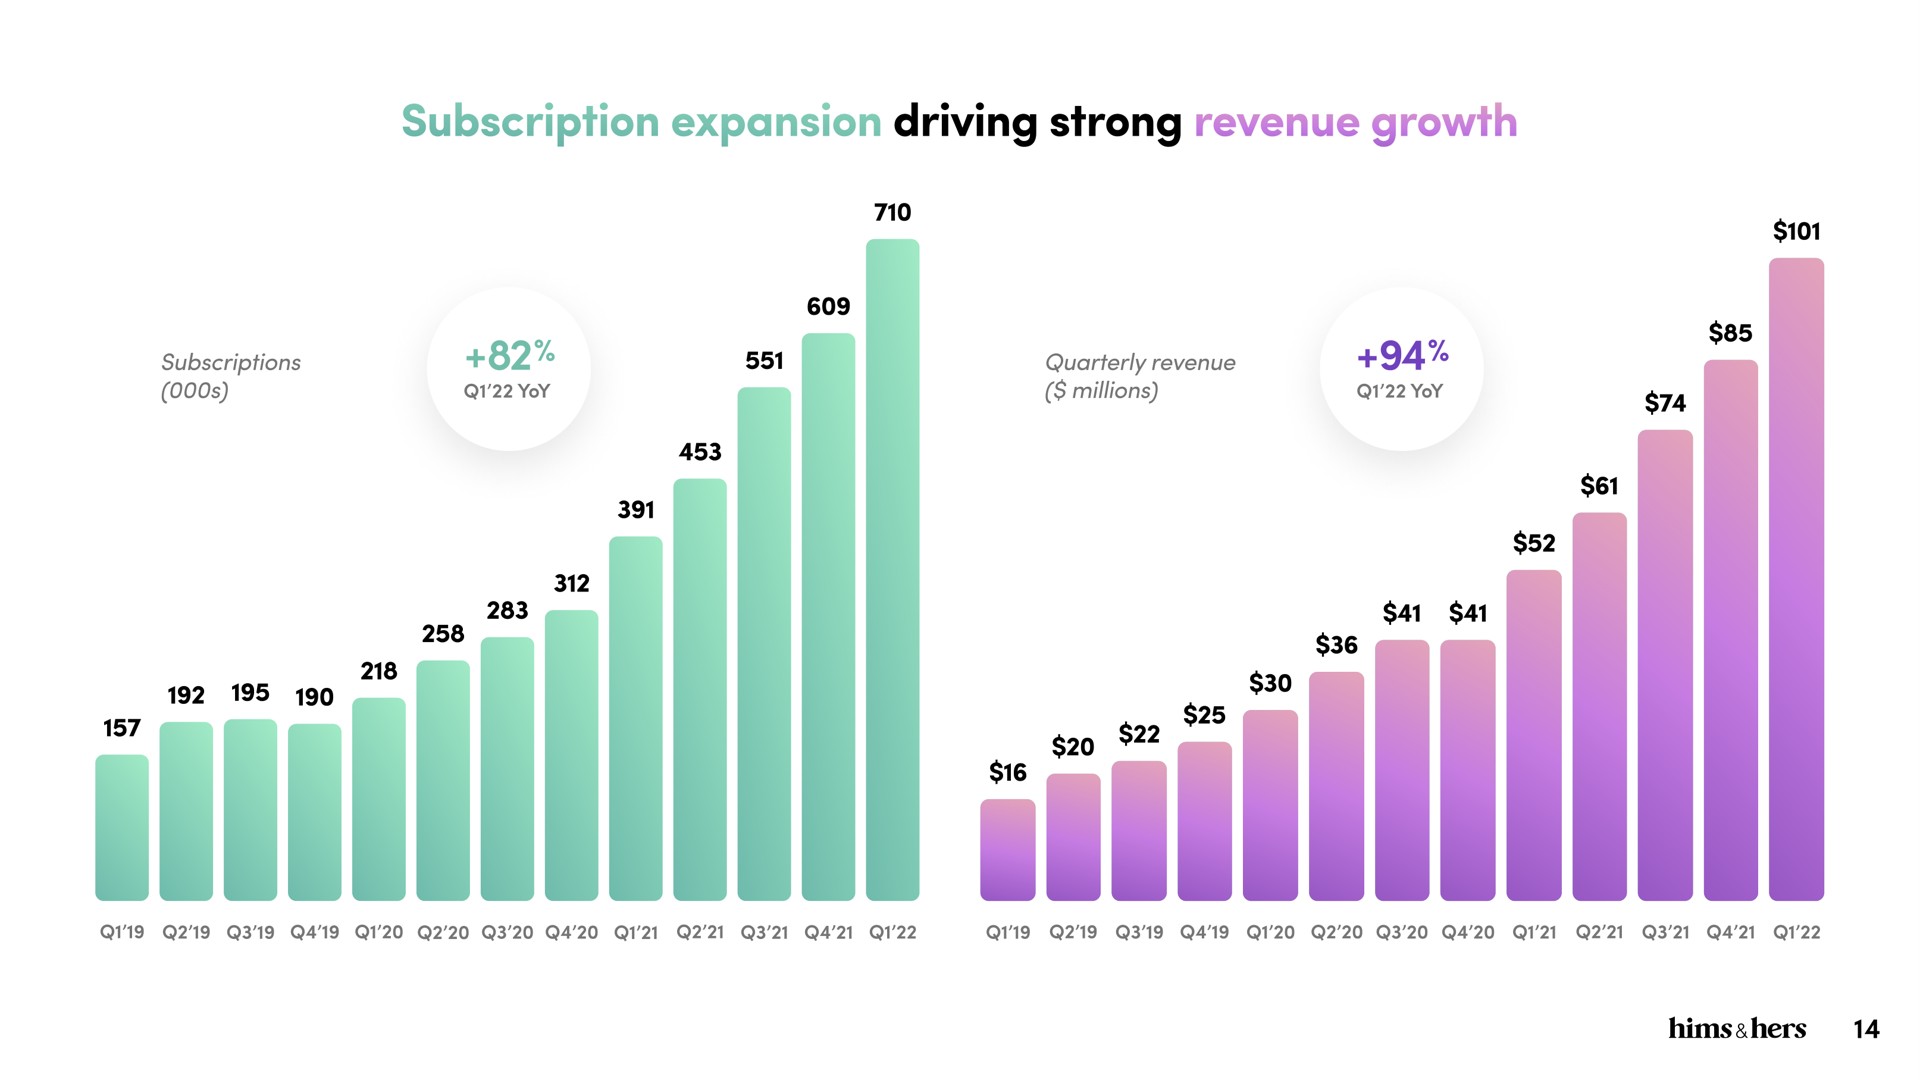 subscription expansion driving strong revenue growth | Hims & Hers